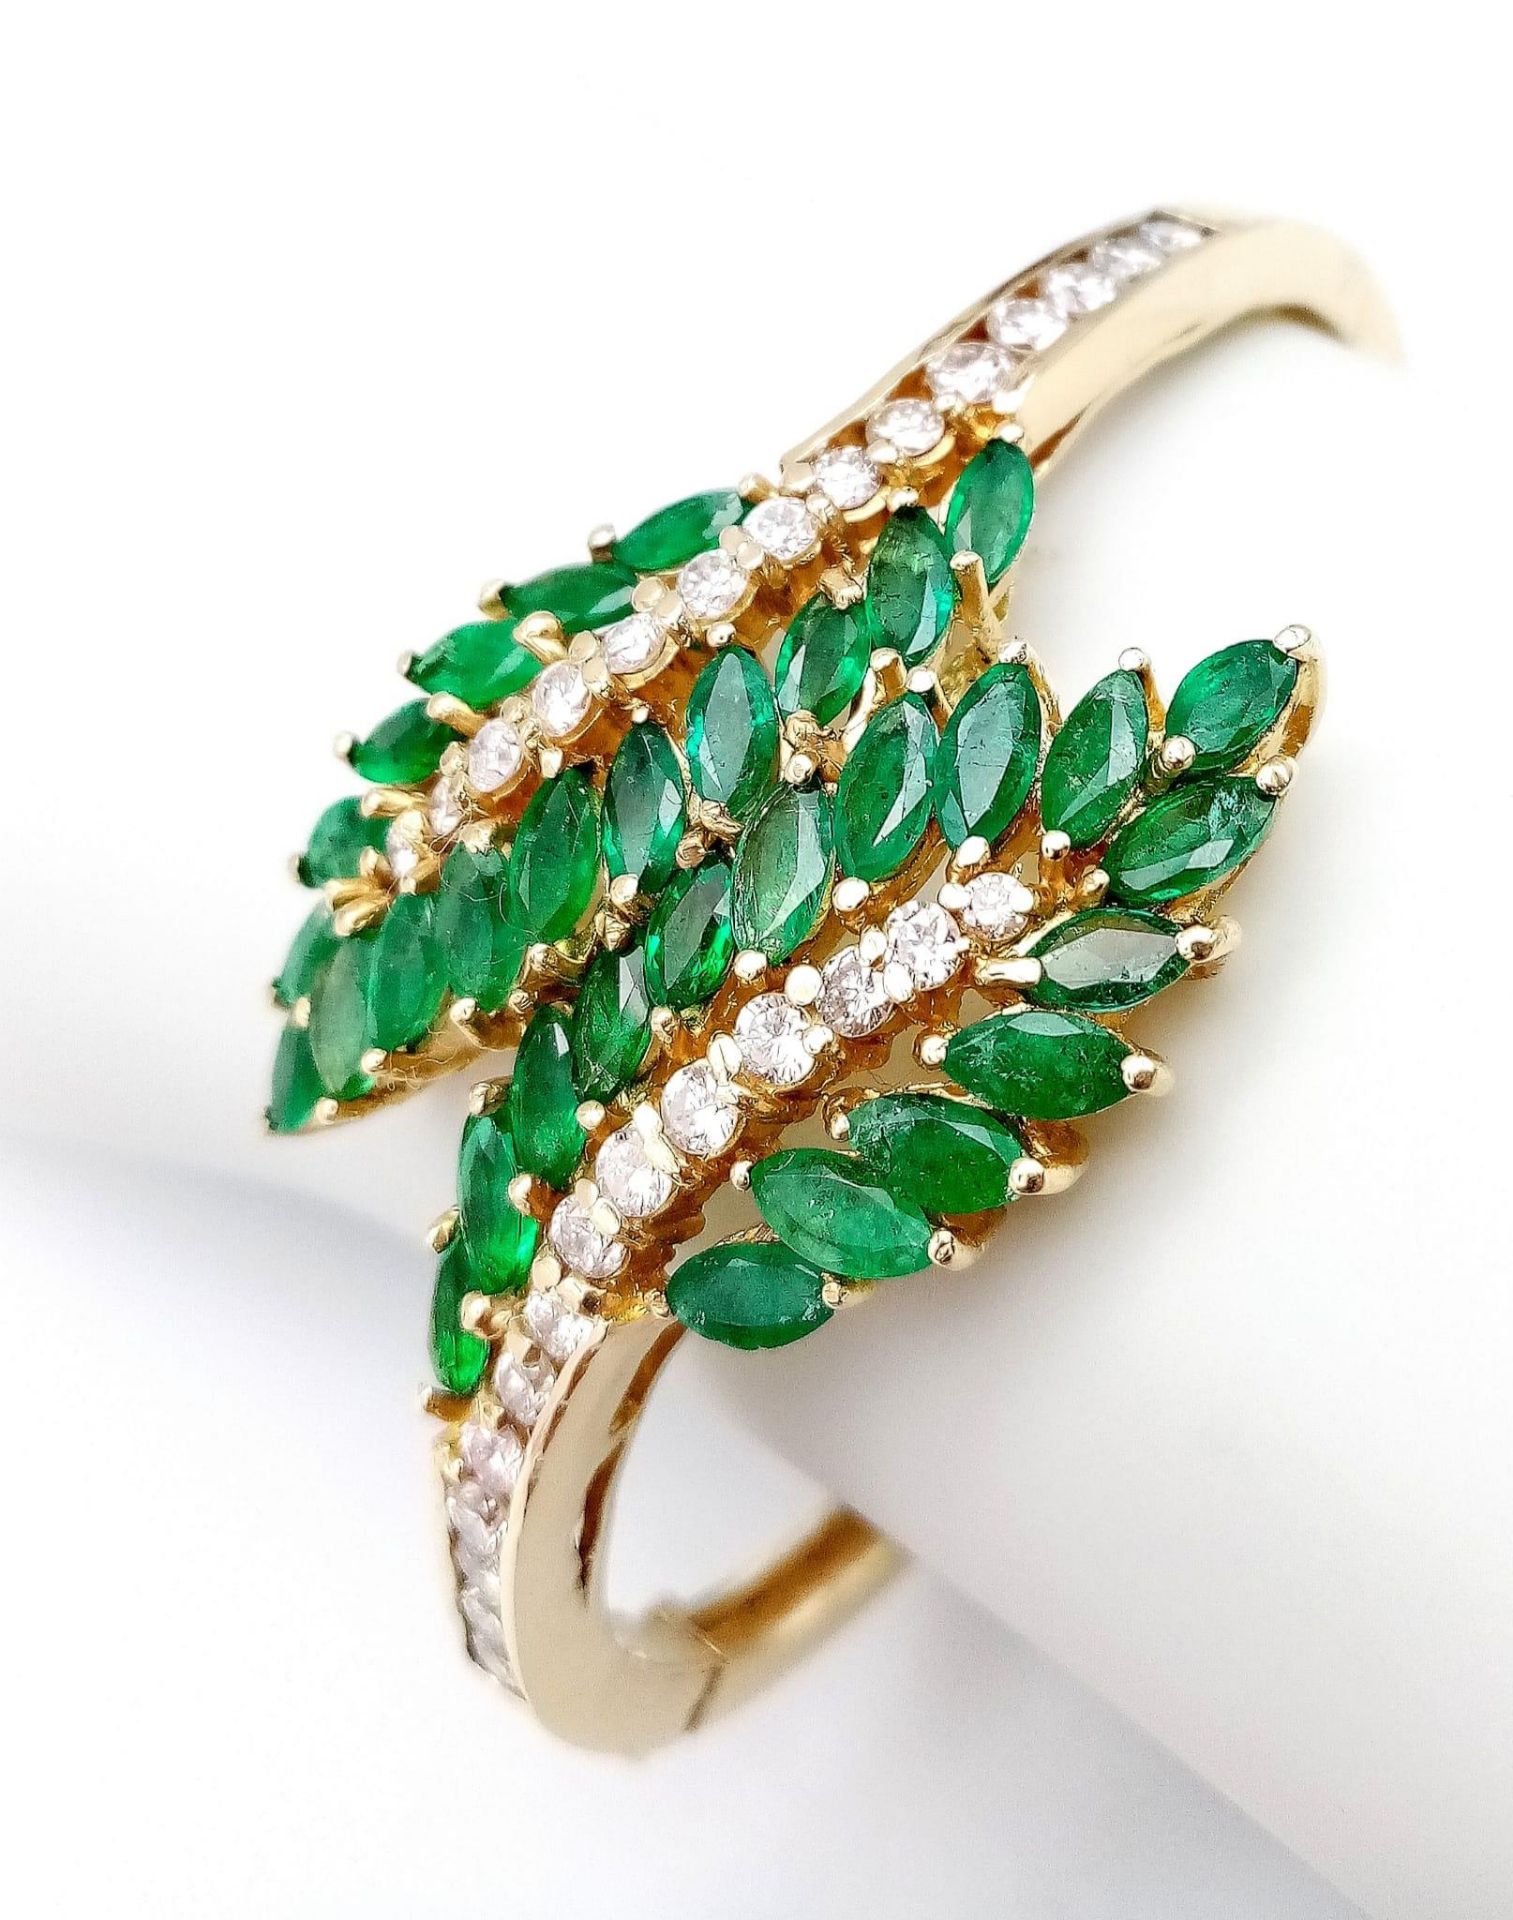 A DIAMOND AND EMERALD LEAF DESIGN BANGLE IN CROSSOVER STYLE SET IN18K GOLD . 33.5gms 10457 - Image 9 of 15